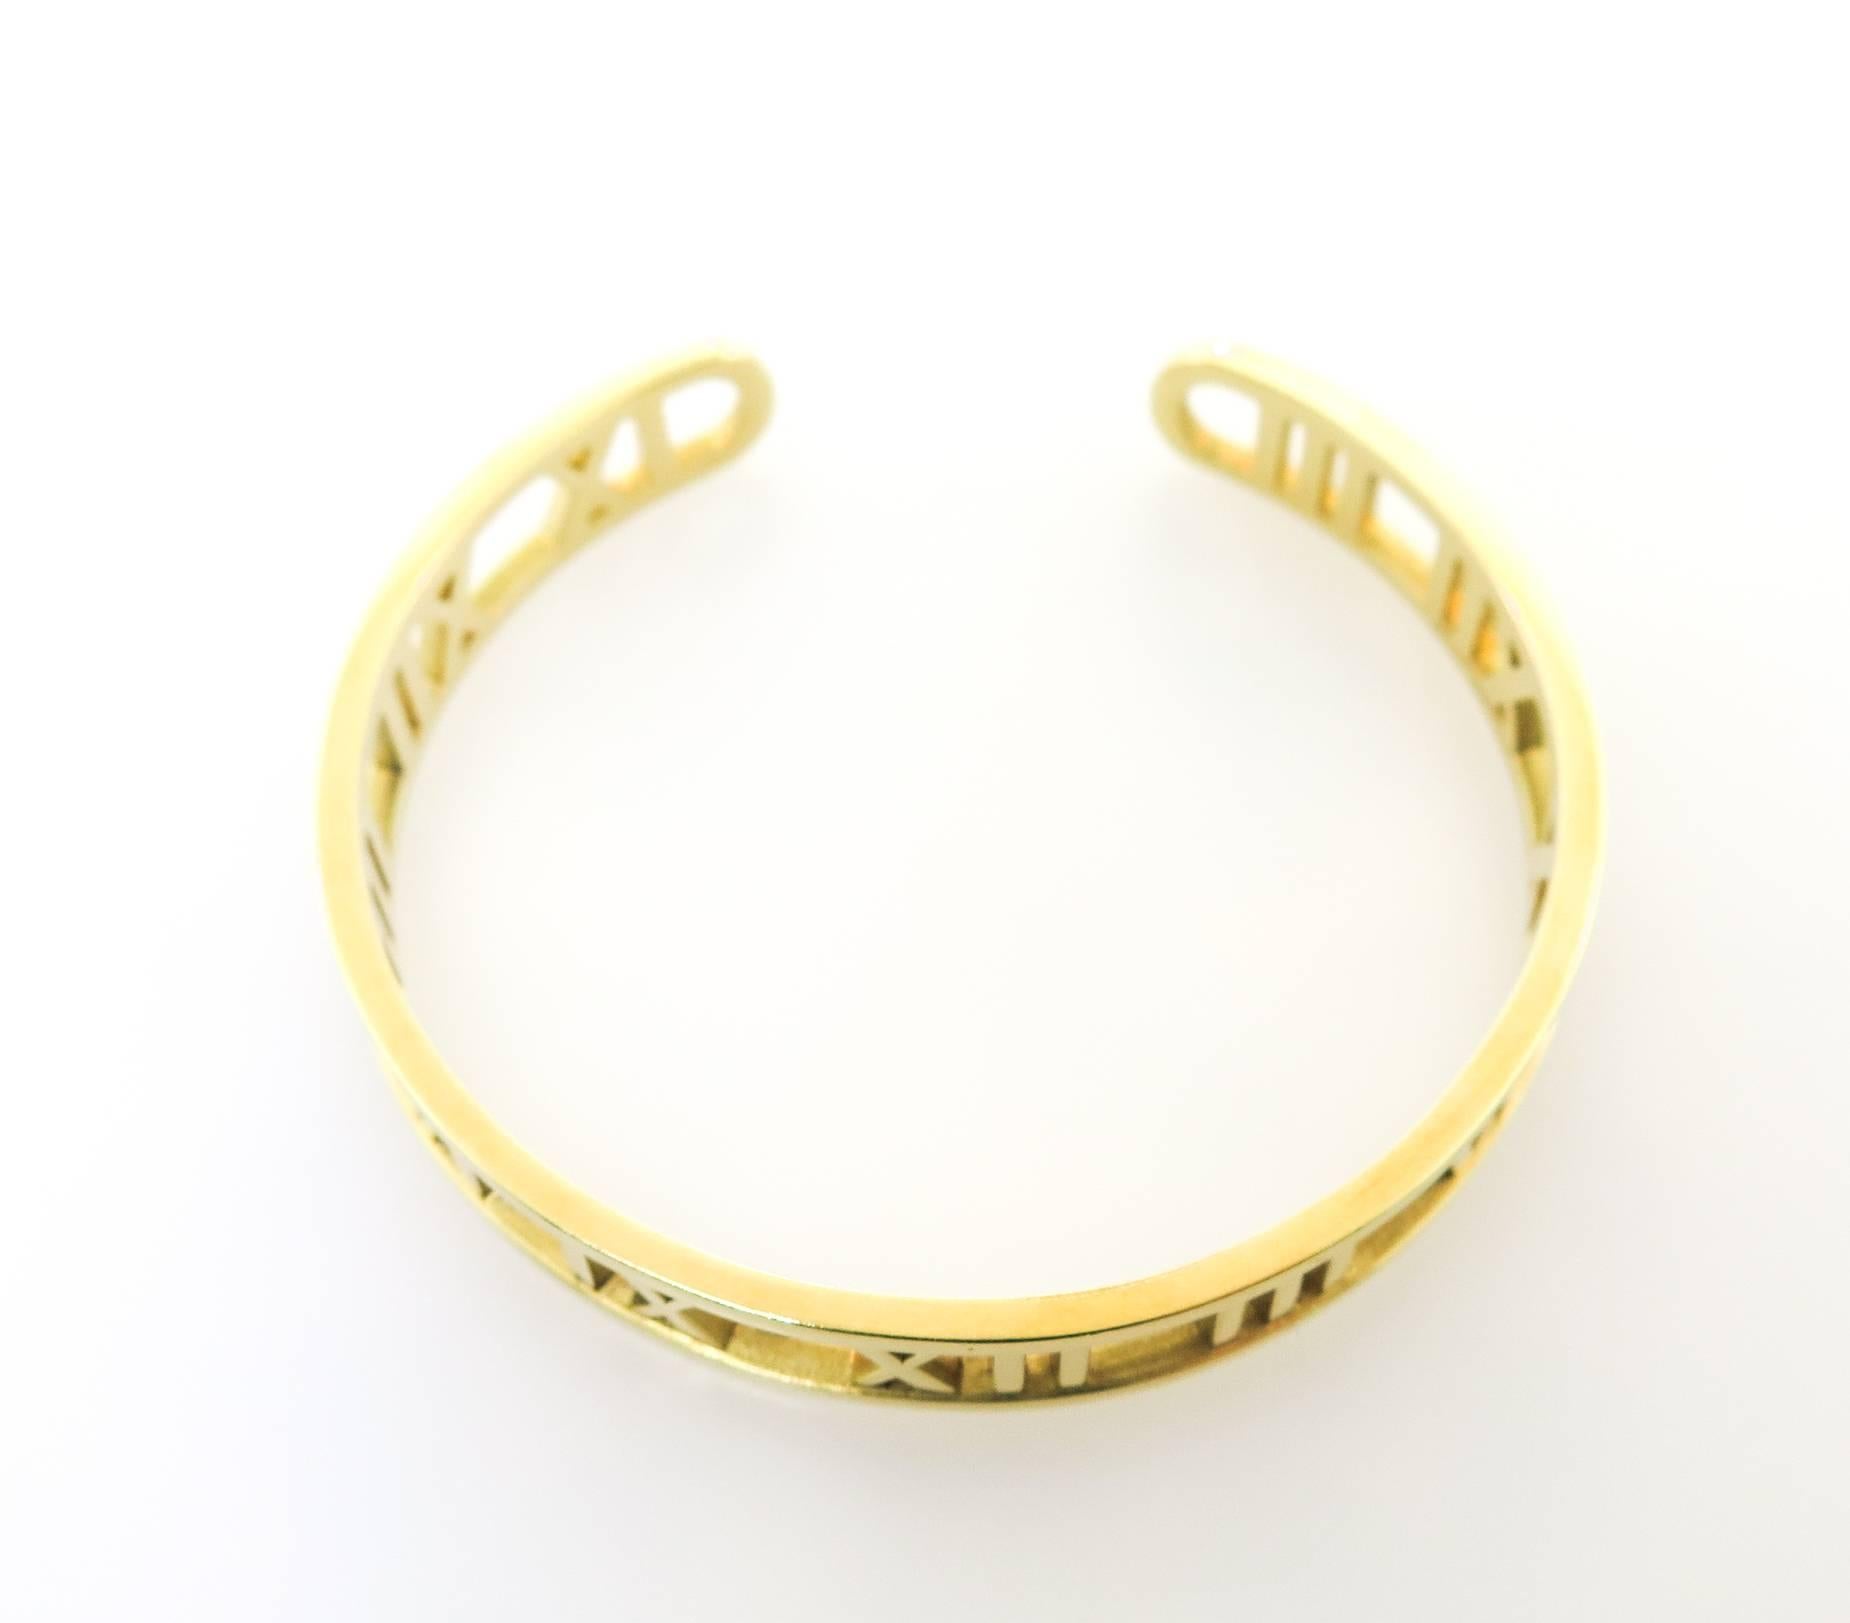 The beautiful Tiffany & Co cuff bracelet is from the Atlas collection. This bracelet  features a bold and distinctive roman numeral motif and sleek lines. Its dated 2003. It has a good weight and feels great on.  Measures 6 inches diameter x 10mm